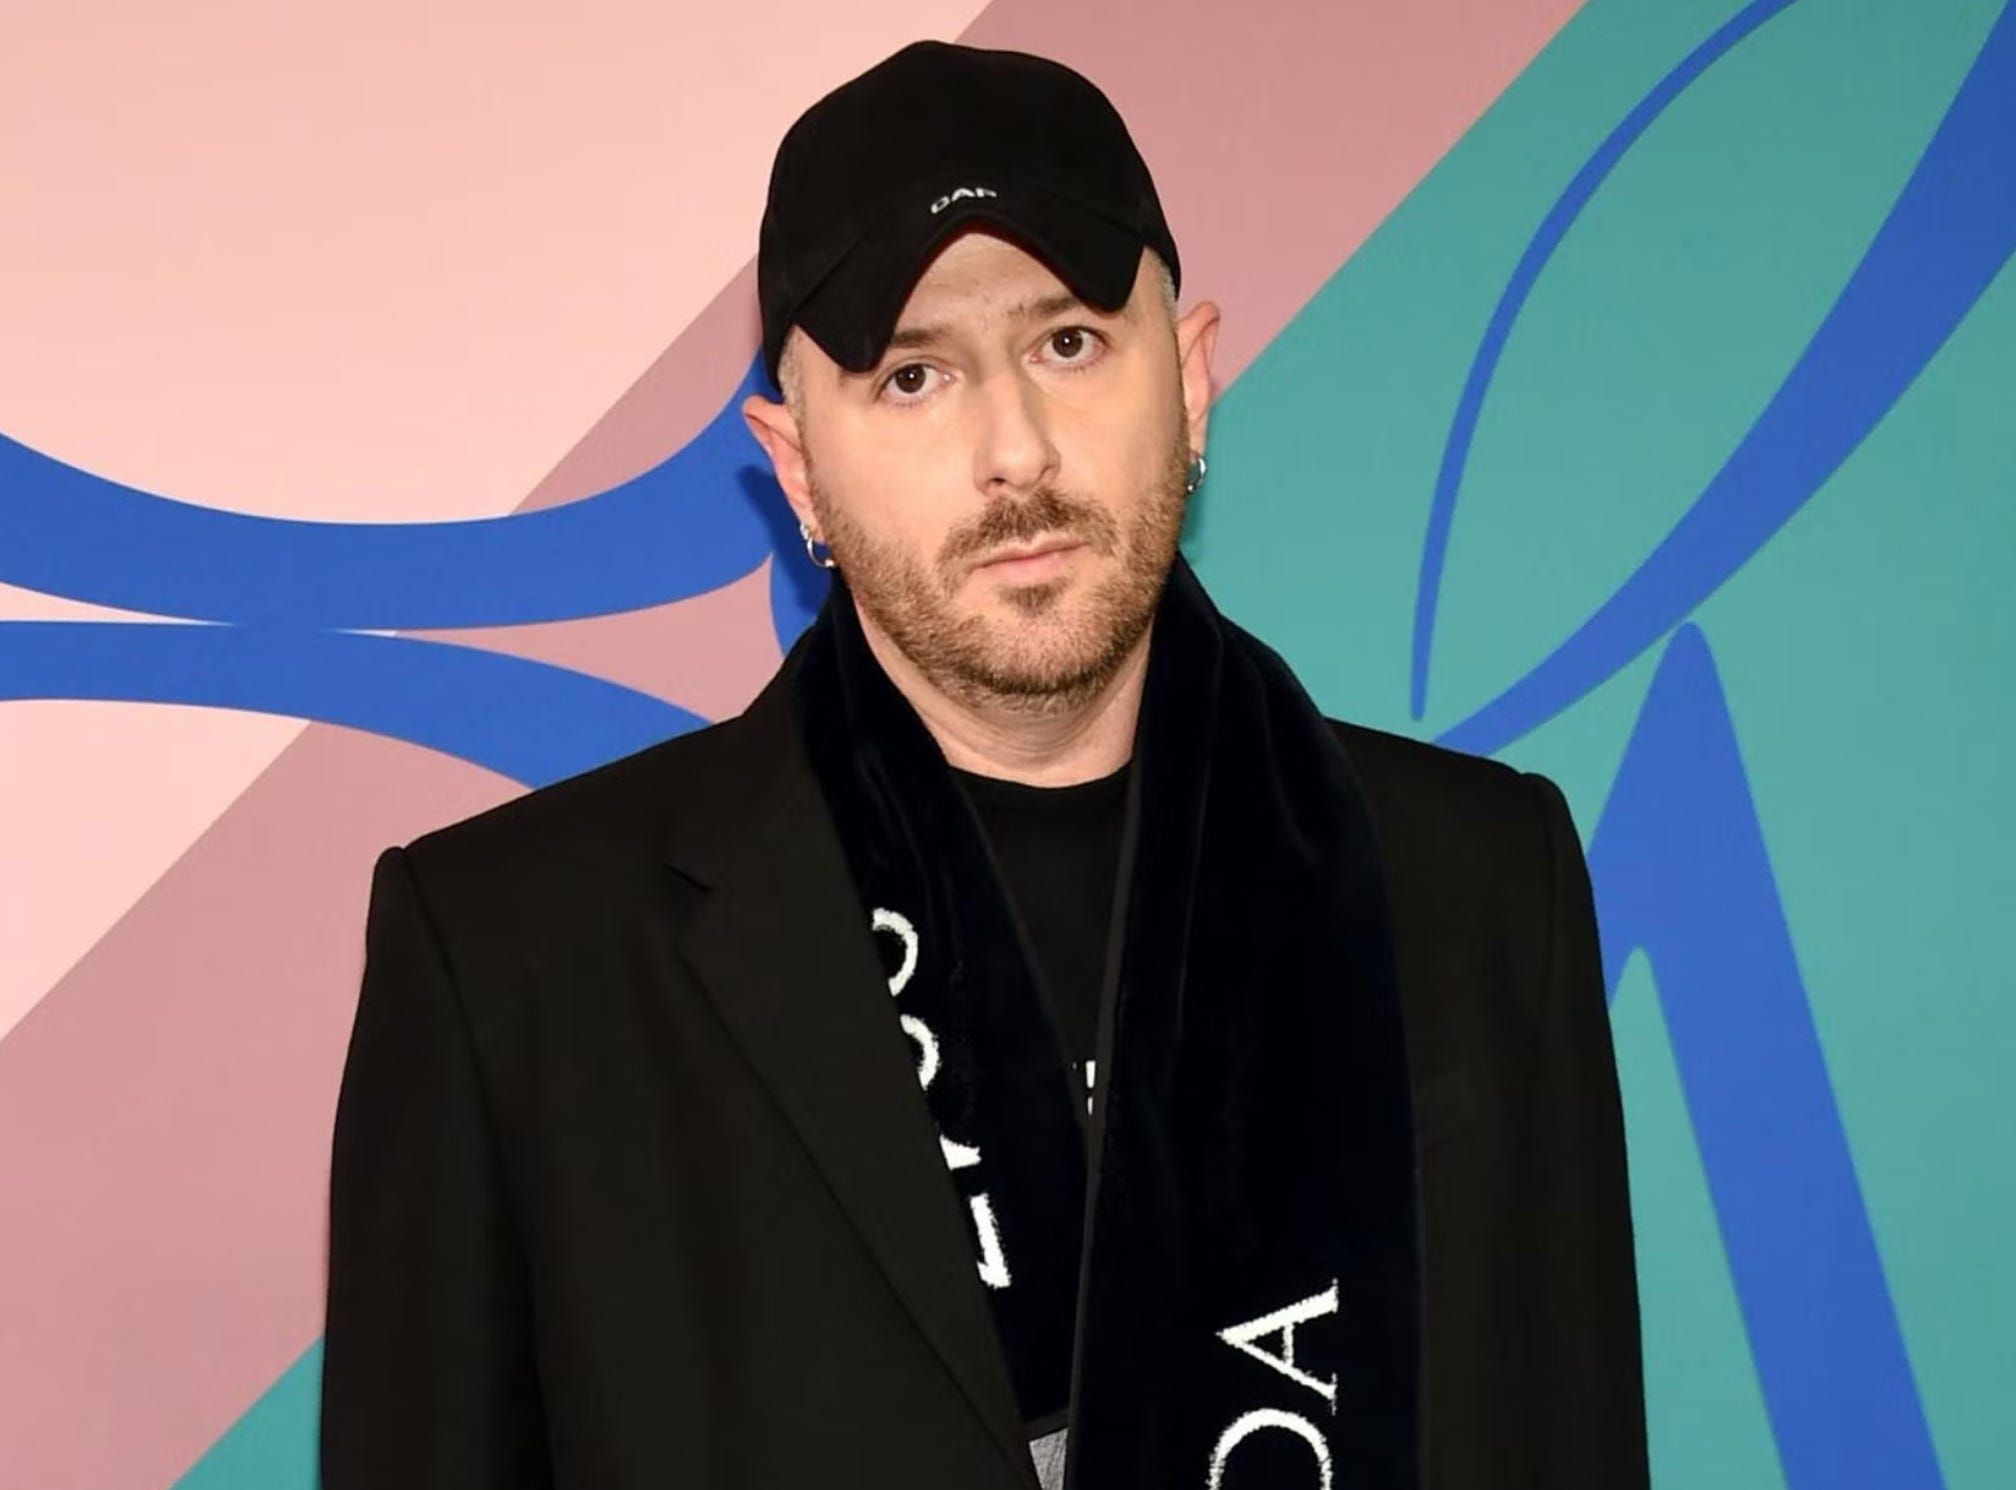 4 Things To Know About Balenciaga's New Creative Director Demna Gvasalia -  Female